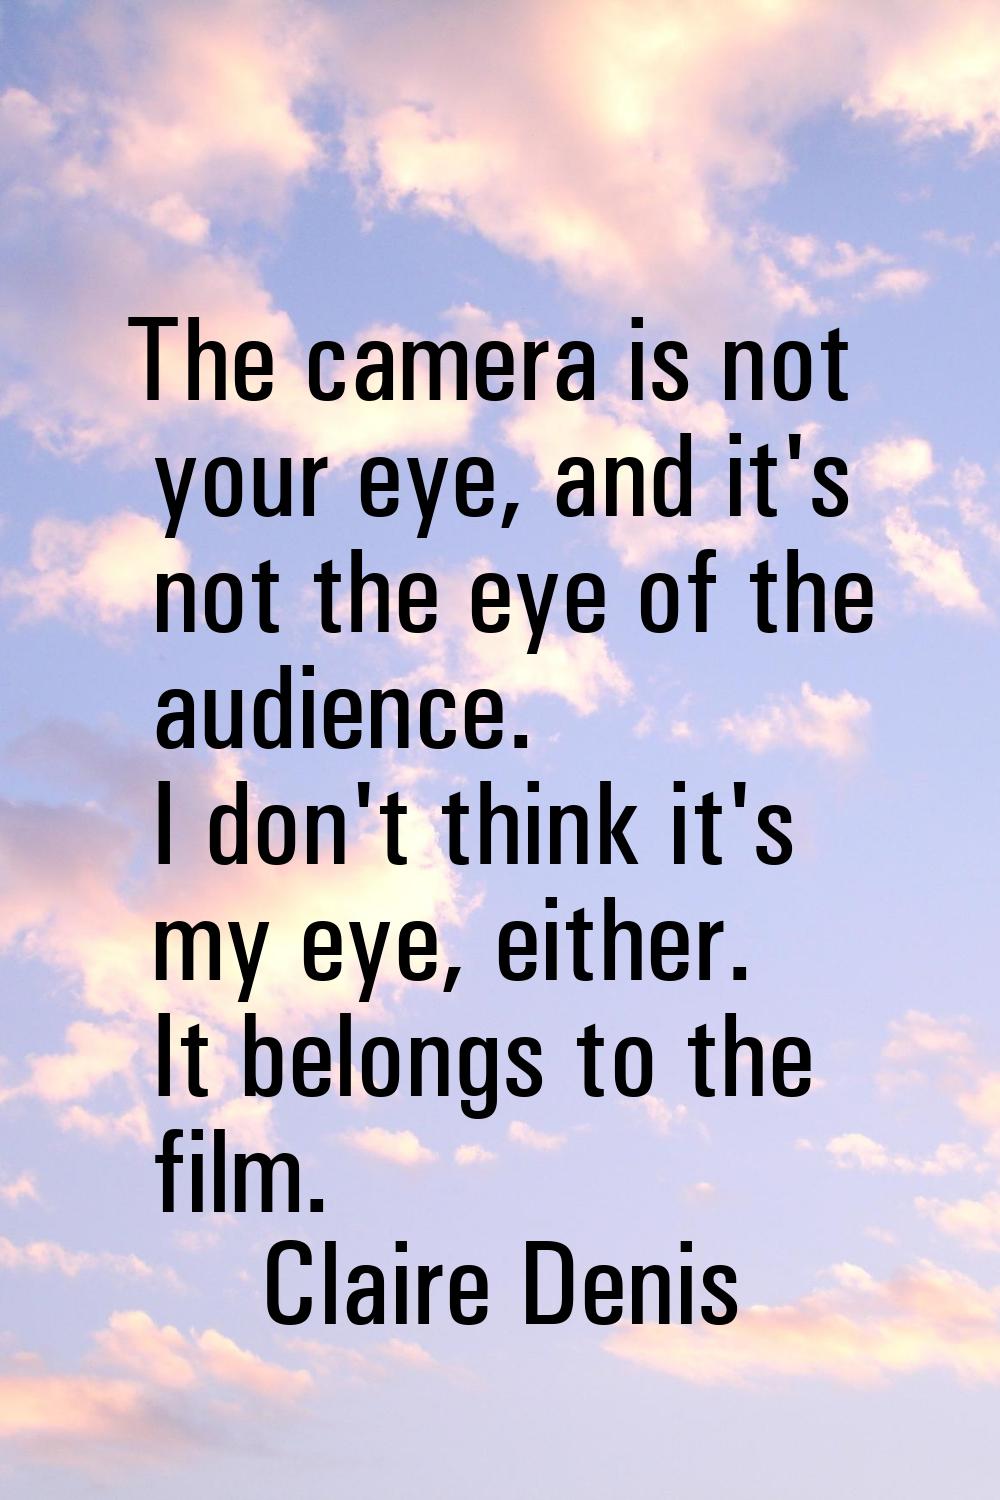 The camera is not your eye, and it's not the eye of the audience. I don't think it's my eye, either